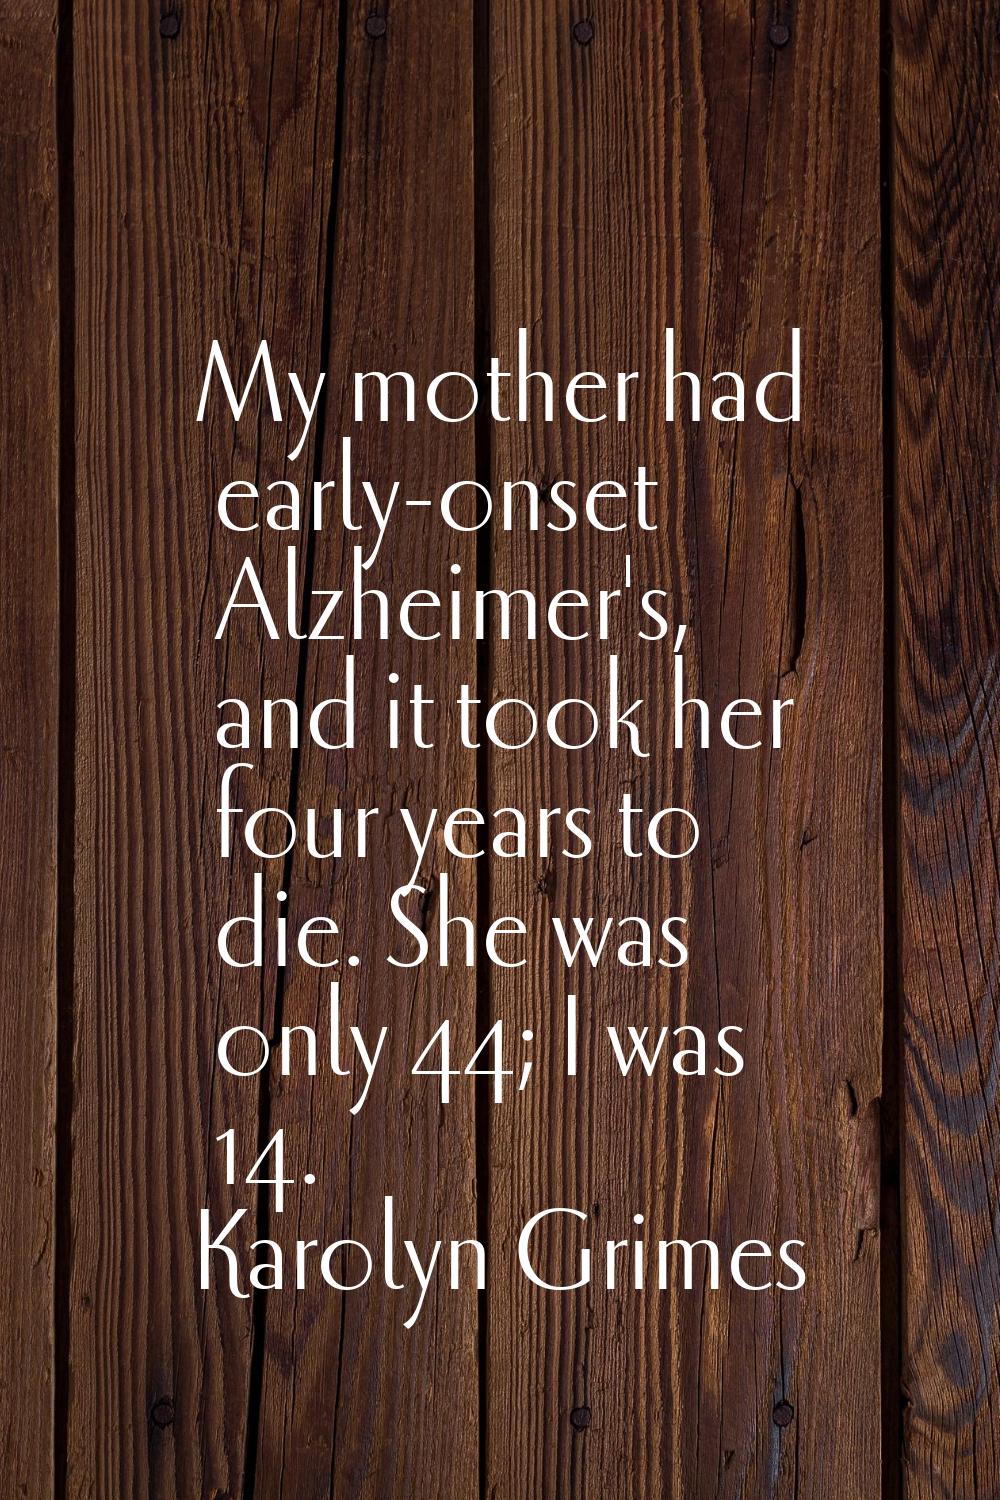 My mother had early-onset Alzheimer's, and it took her four years to die. She was only 44; I was 14